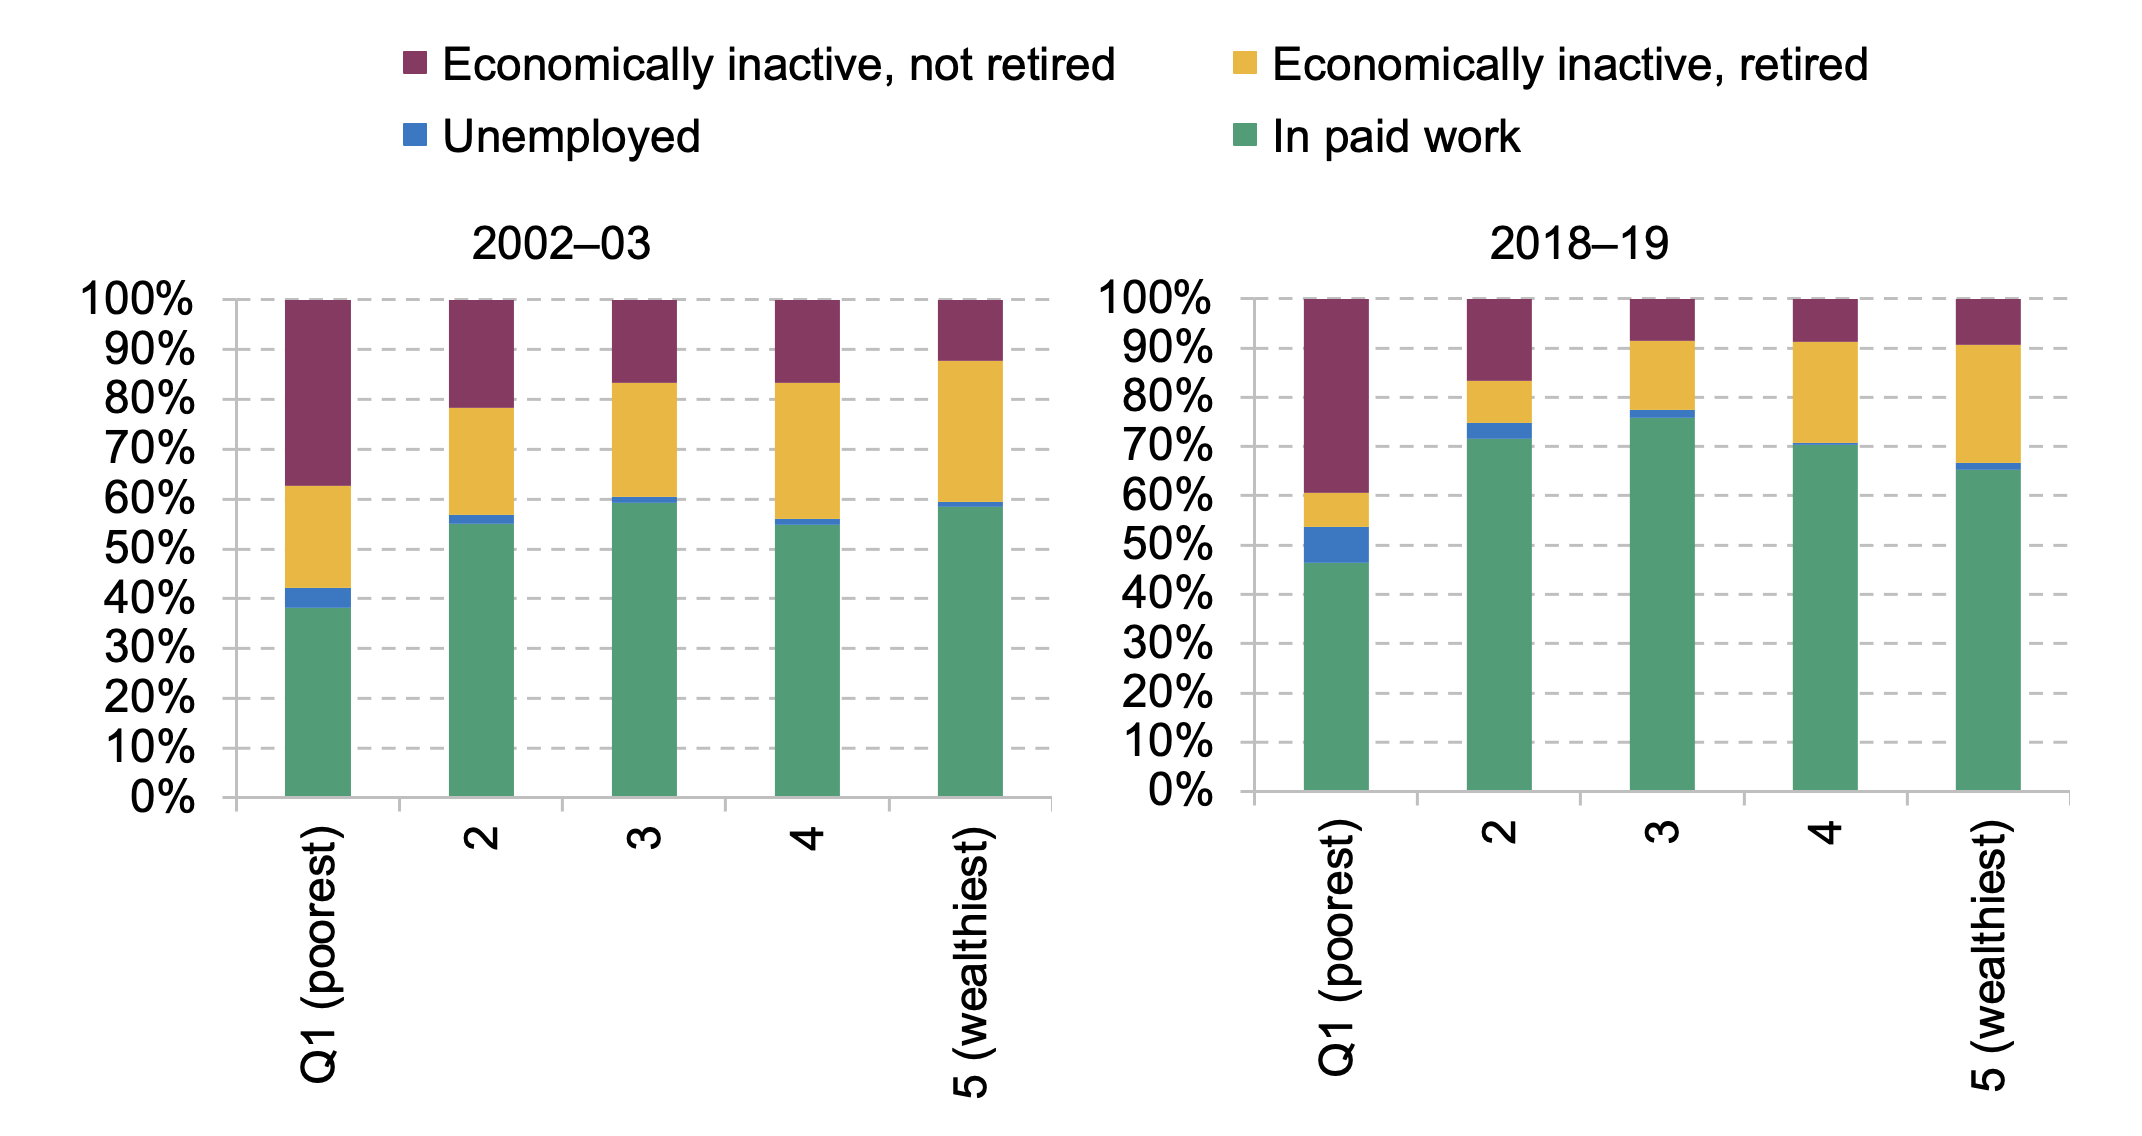 Economic activity of people aged 55–64, by (non-pension) wealth quintile, 2002–03 and 2018–19